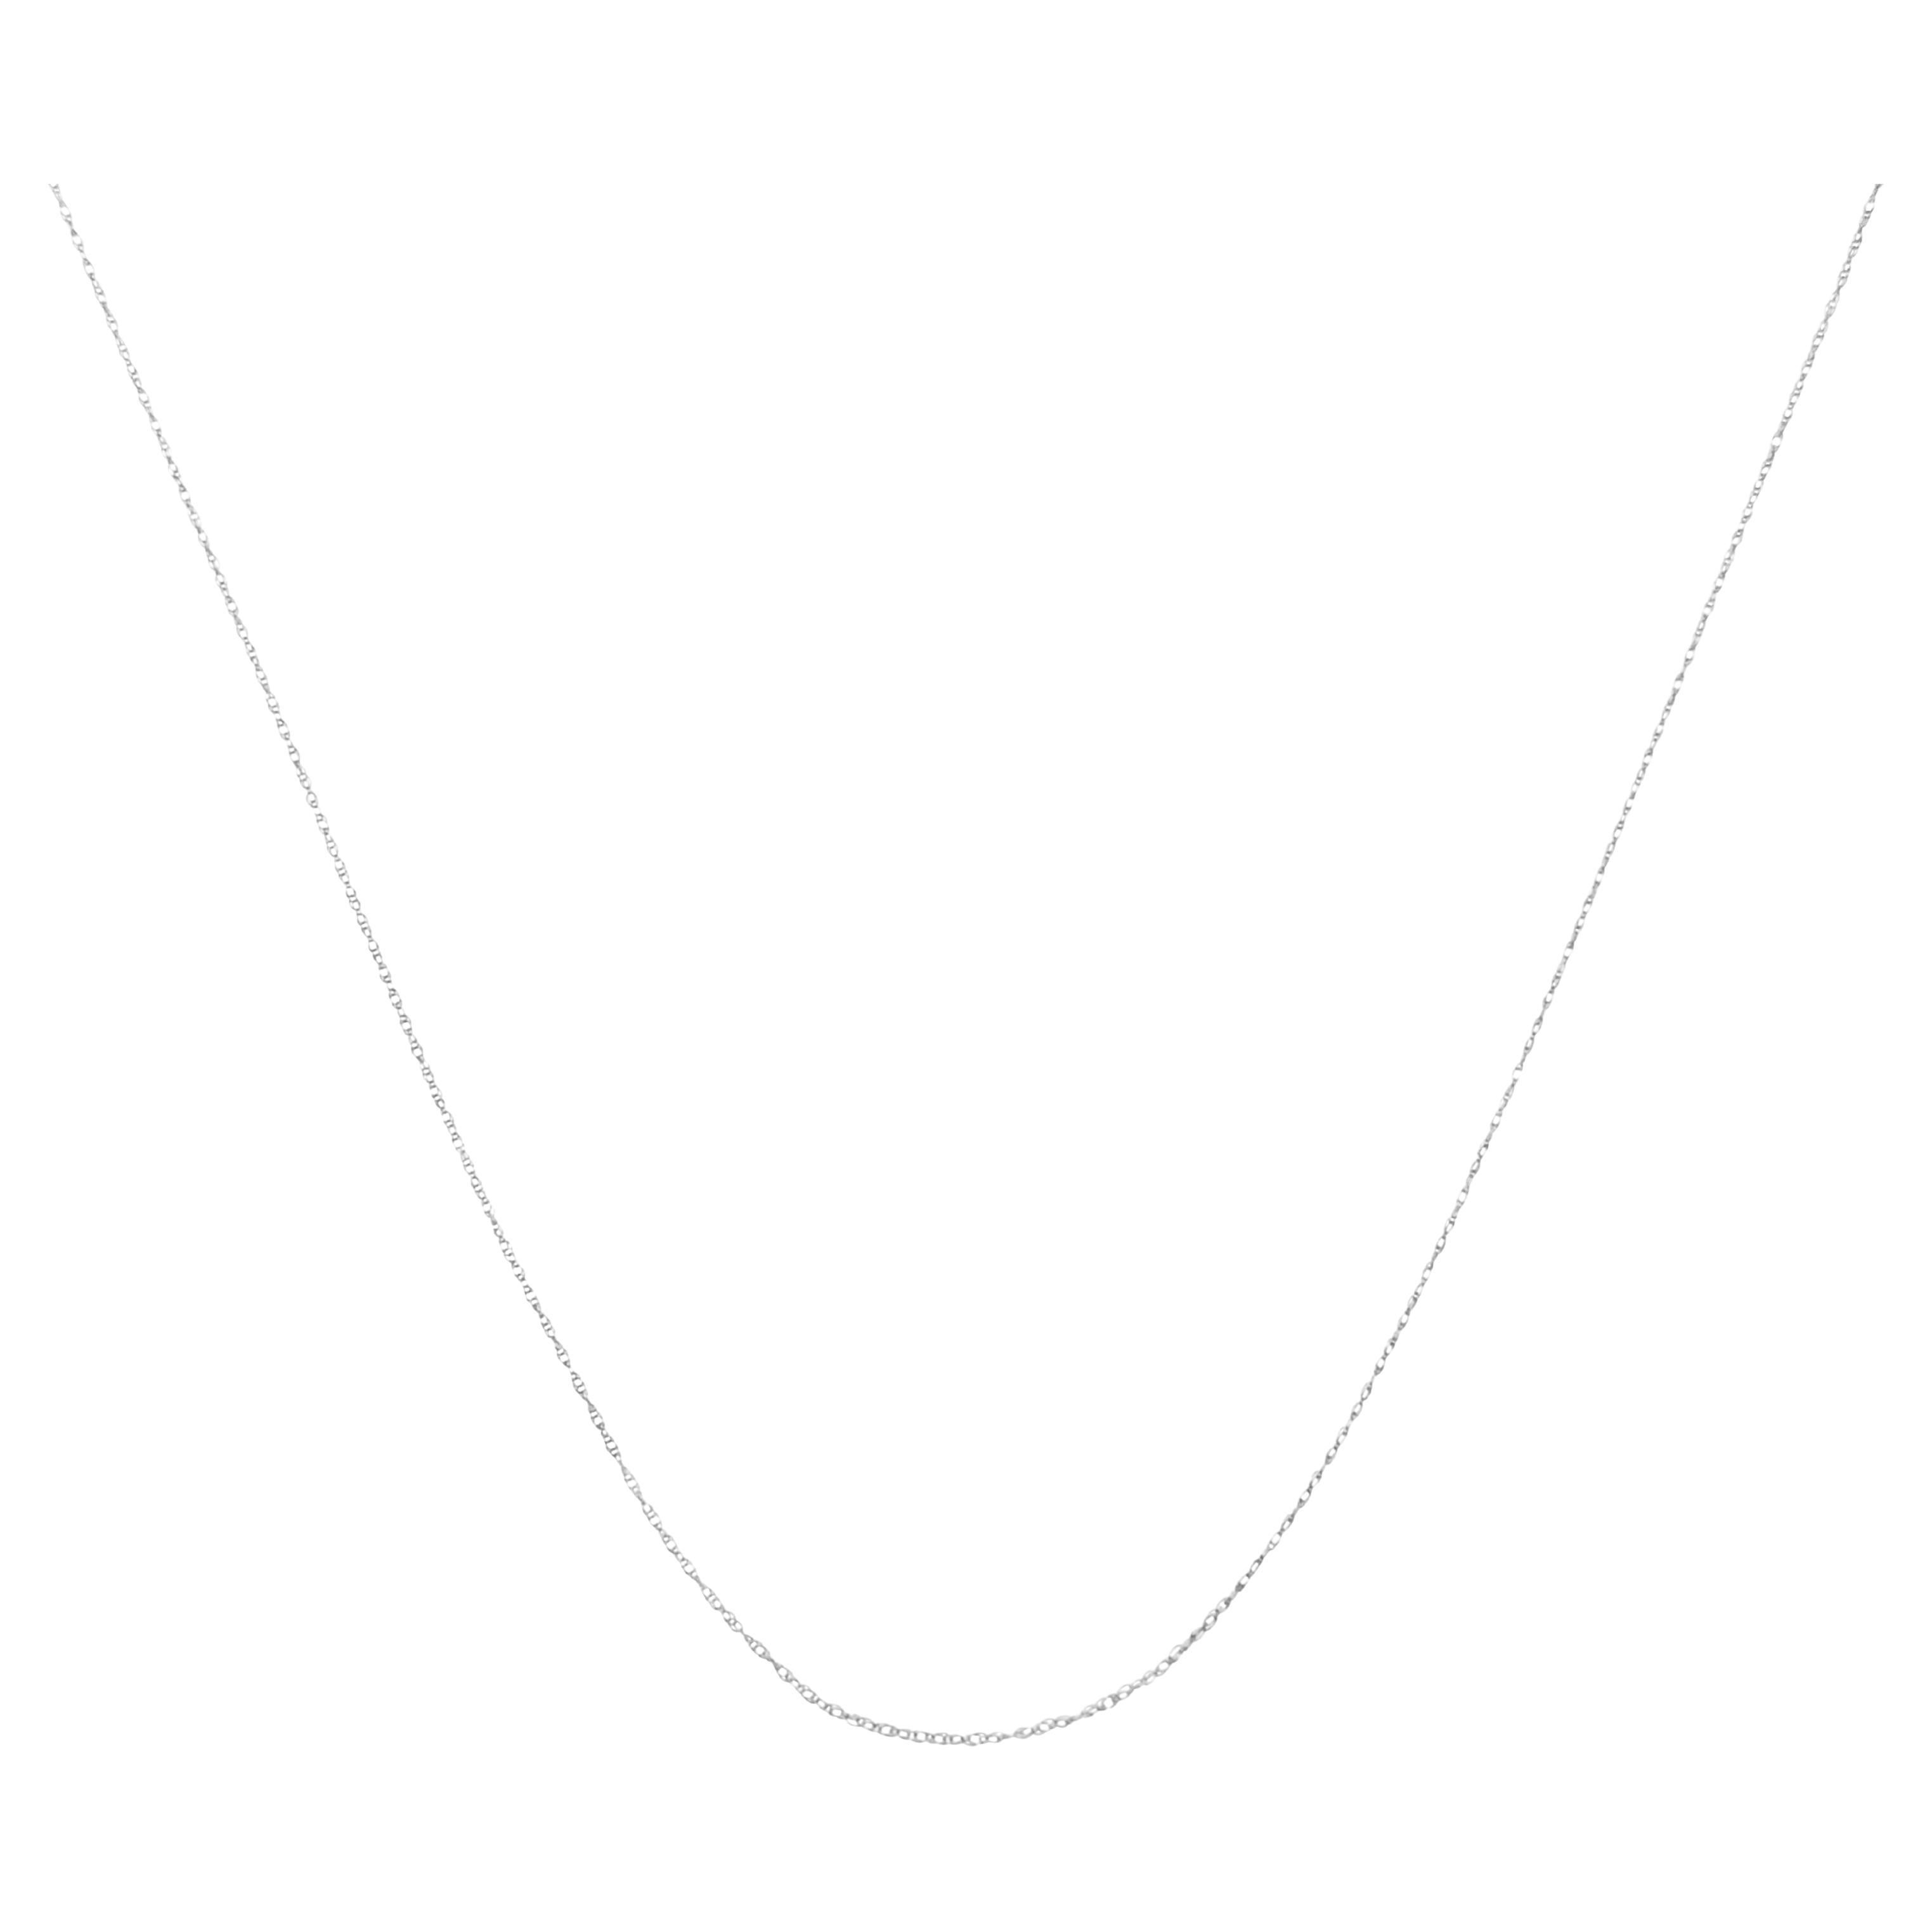 Solid 10K White Gold Slim and Dainty Unisex Rope Chain Necklace Chain For Sale